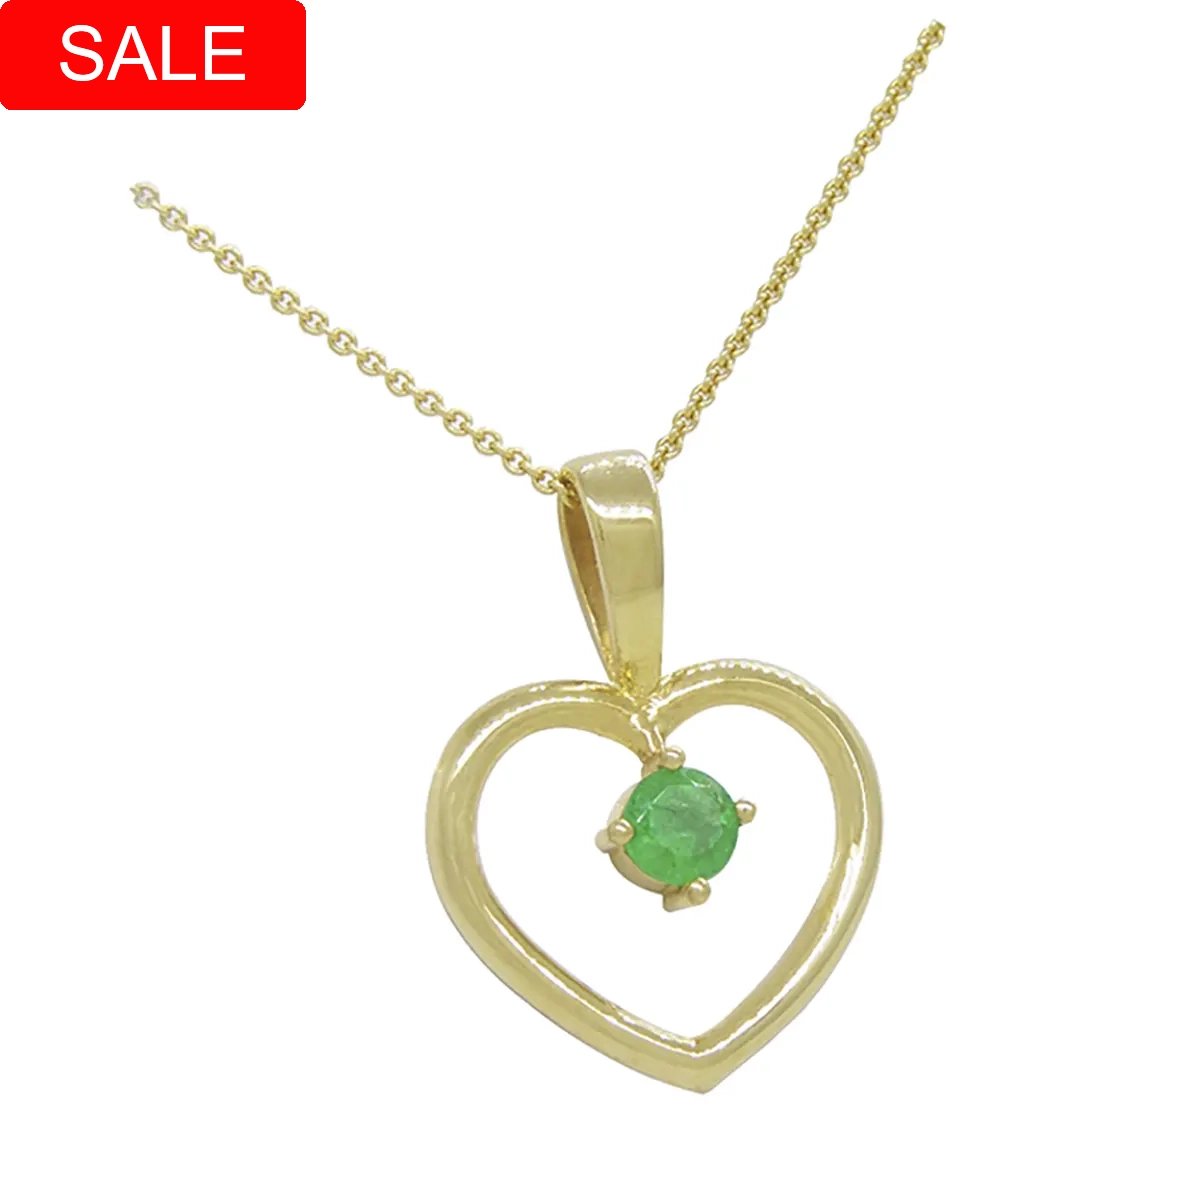 Gold-plated heart-shaped emerald pendant with 0.22 Ct. round cut real natural emerald set in prongs in the middle of the heart form